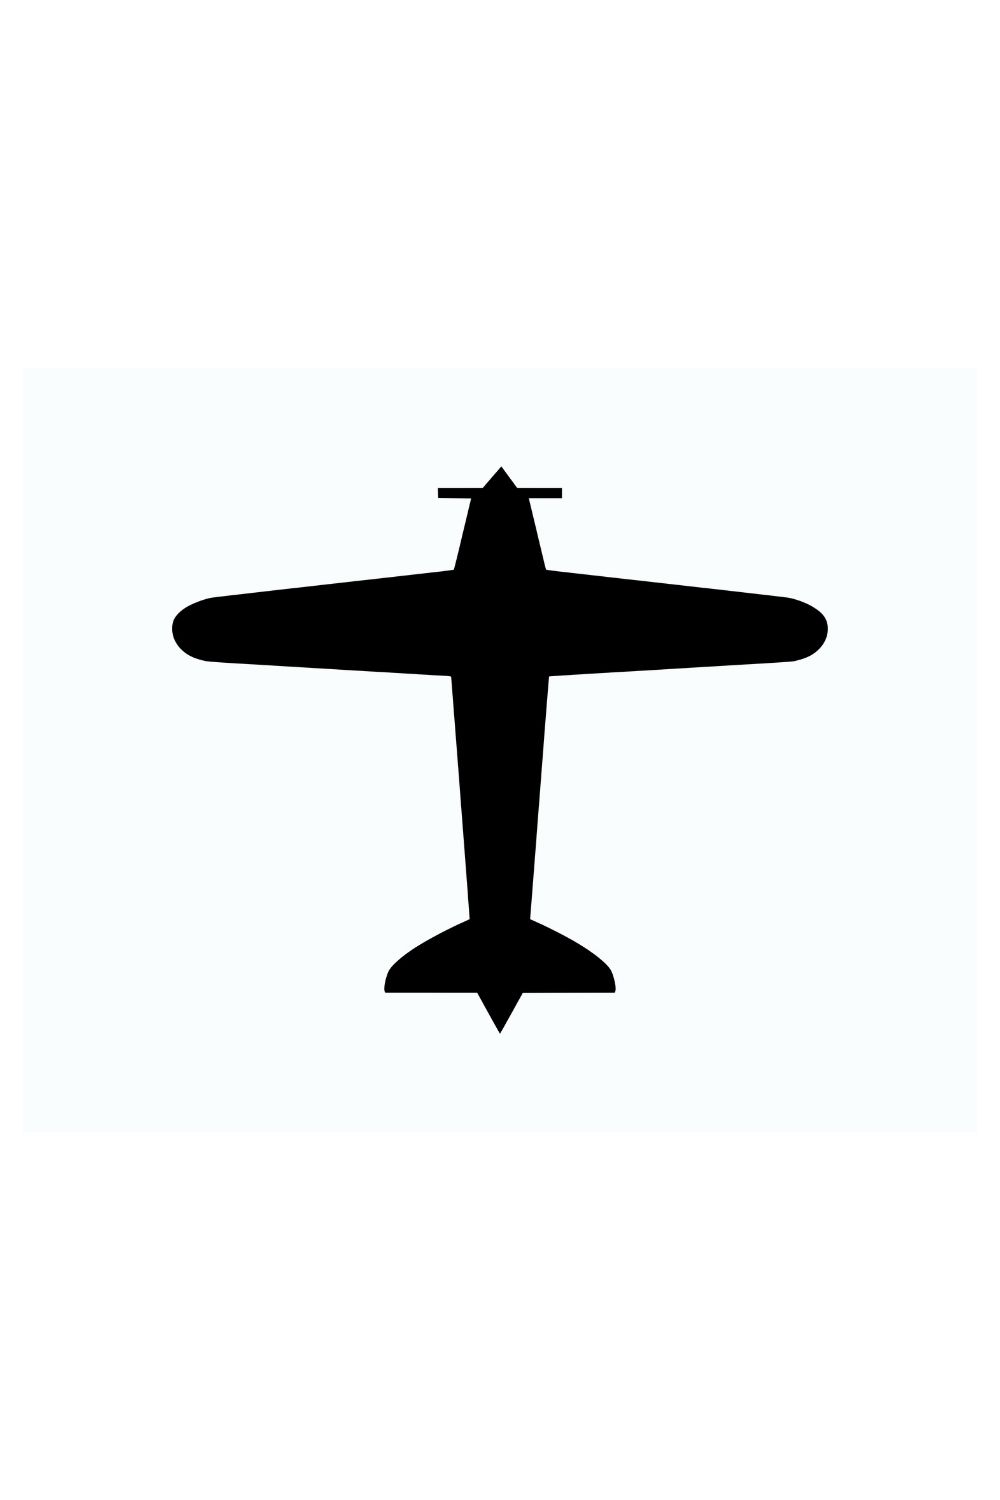 Airplane SVG cover image.